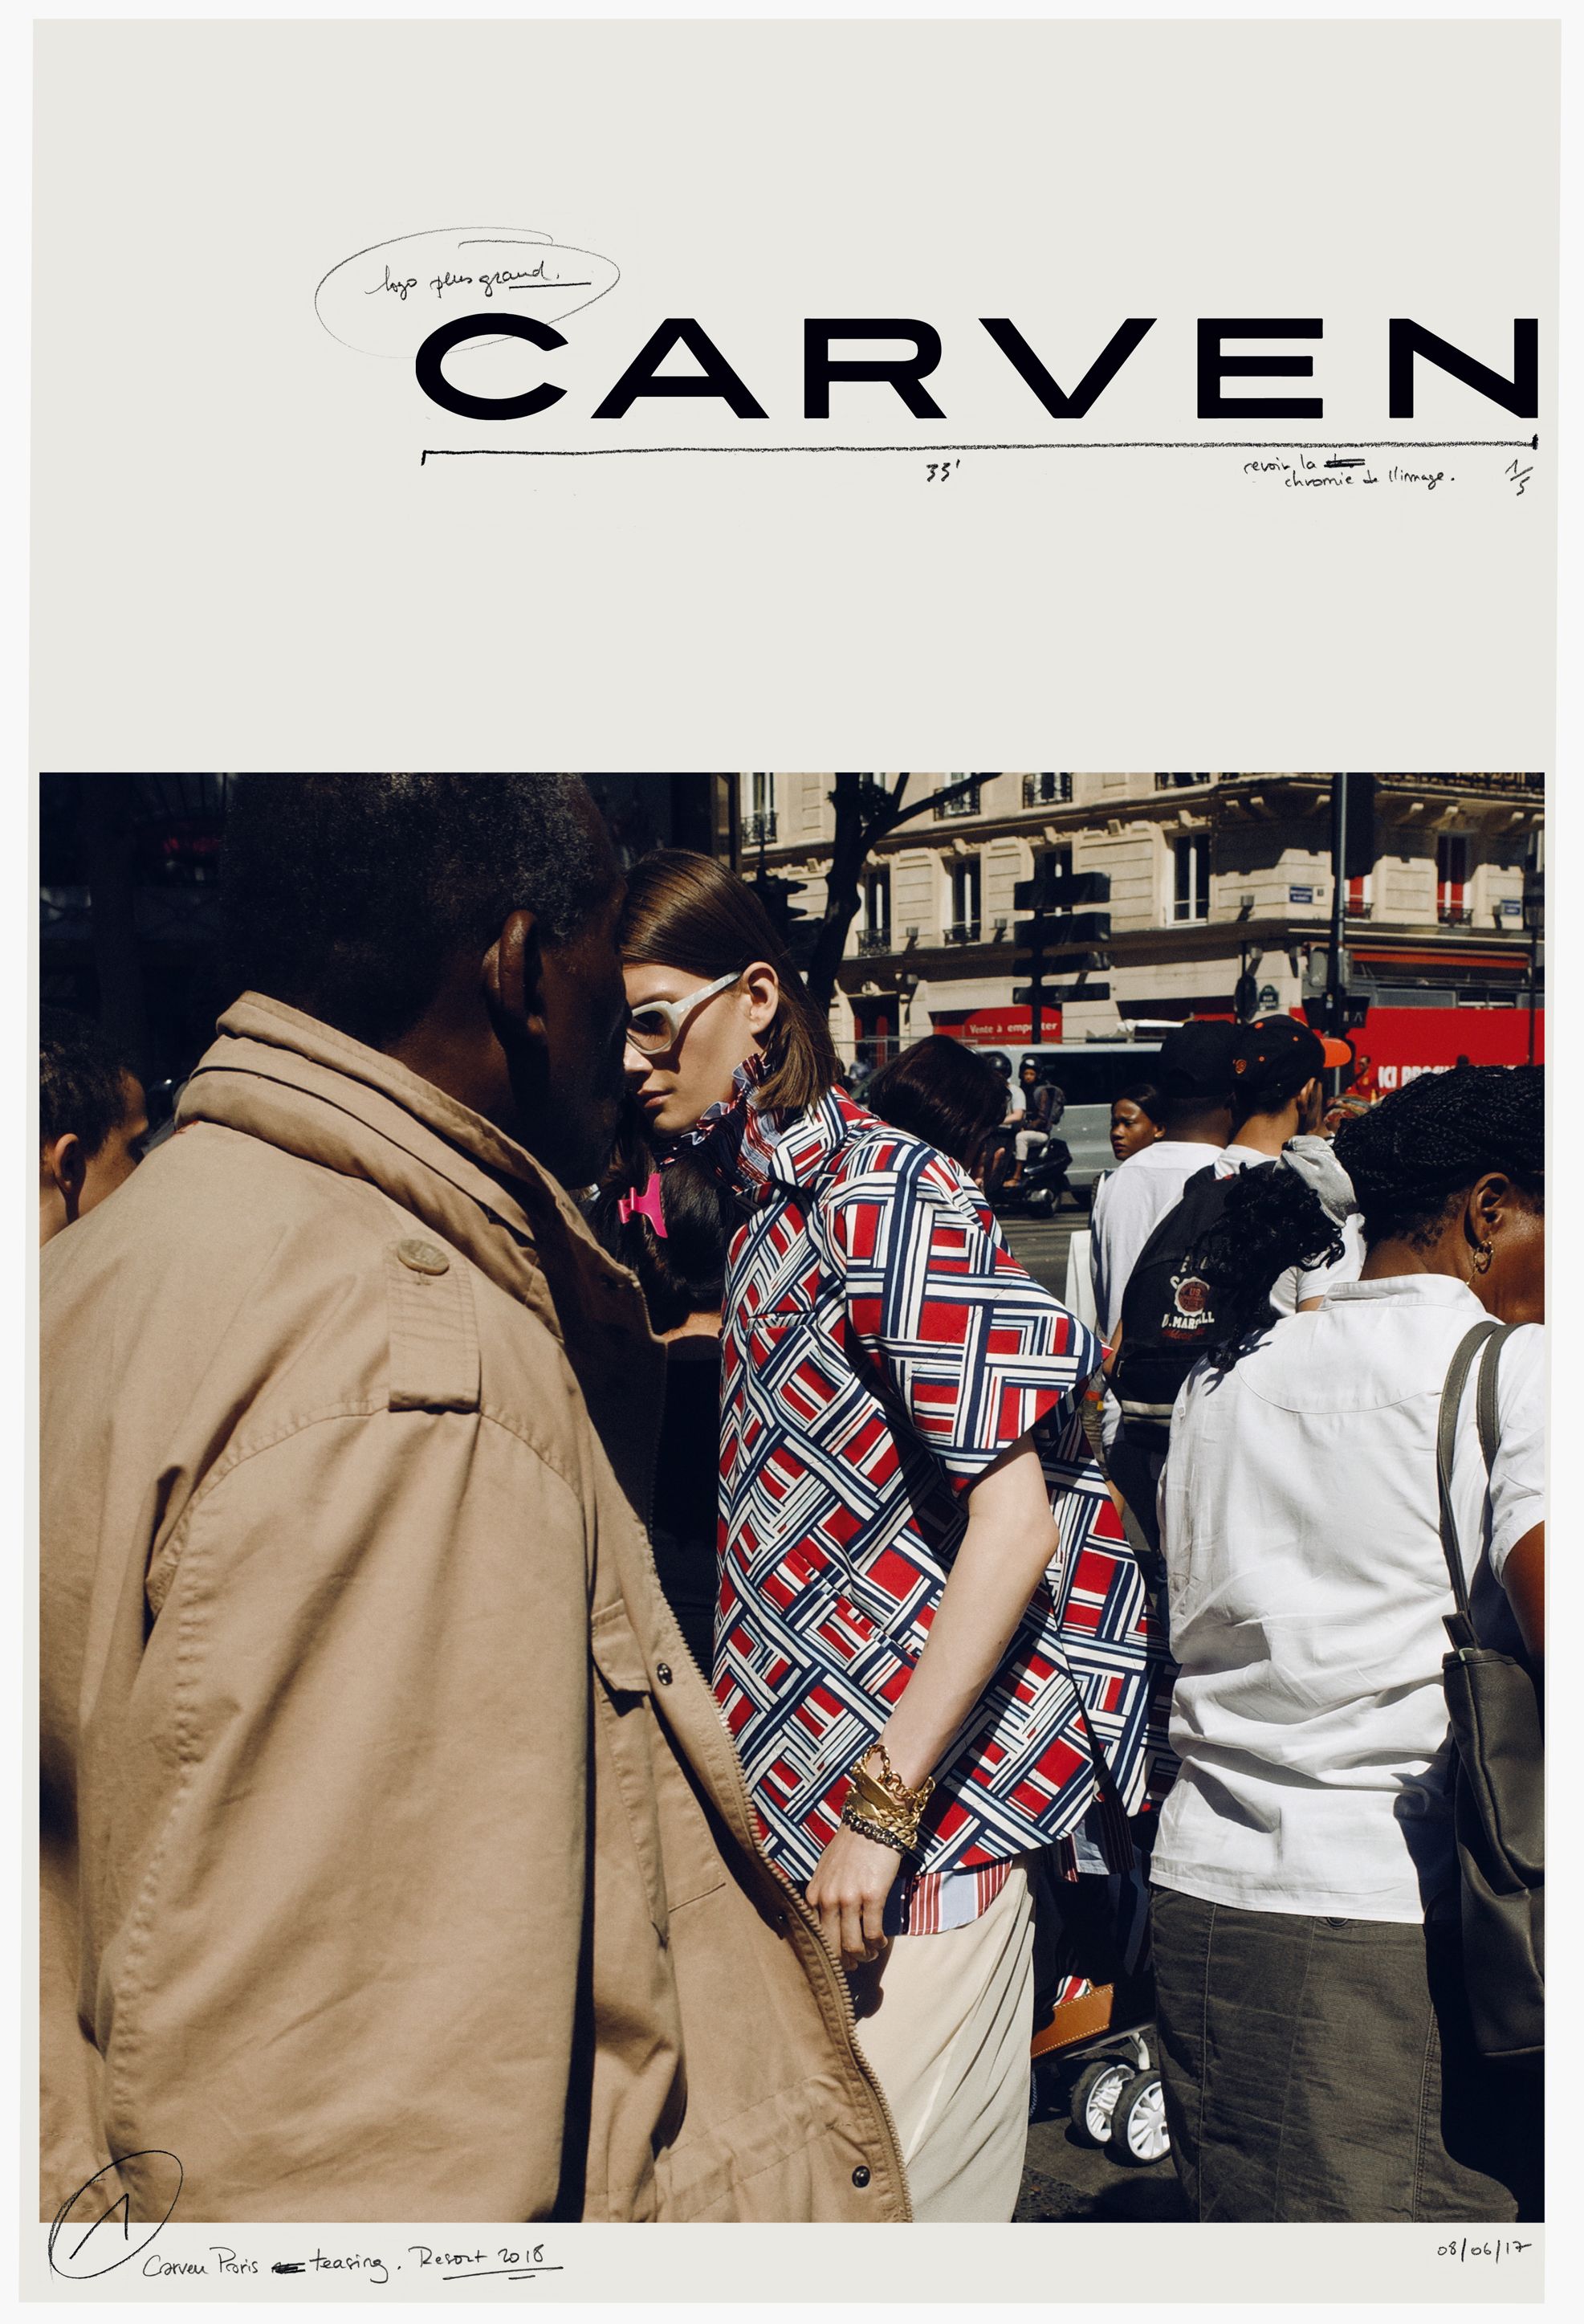 A model in a Carven ad